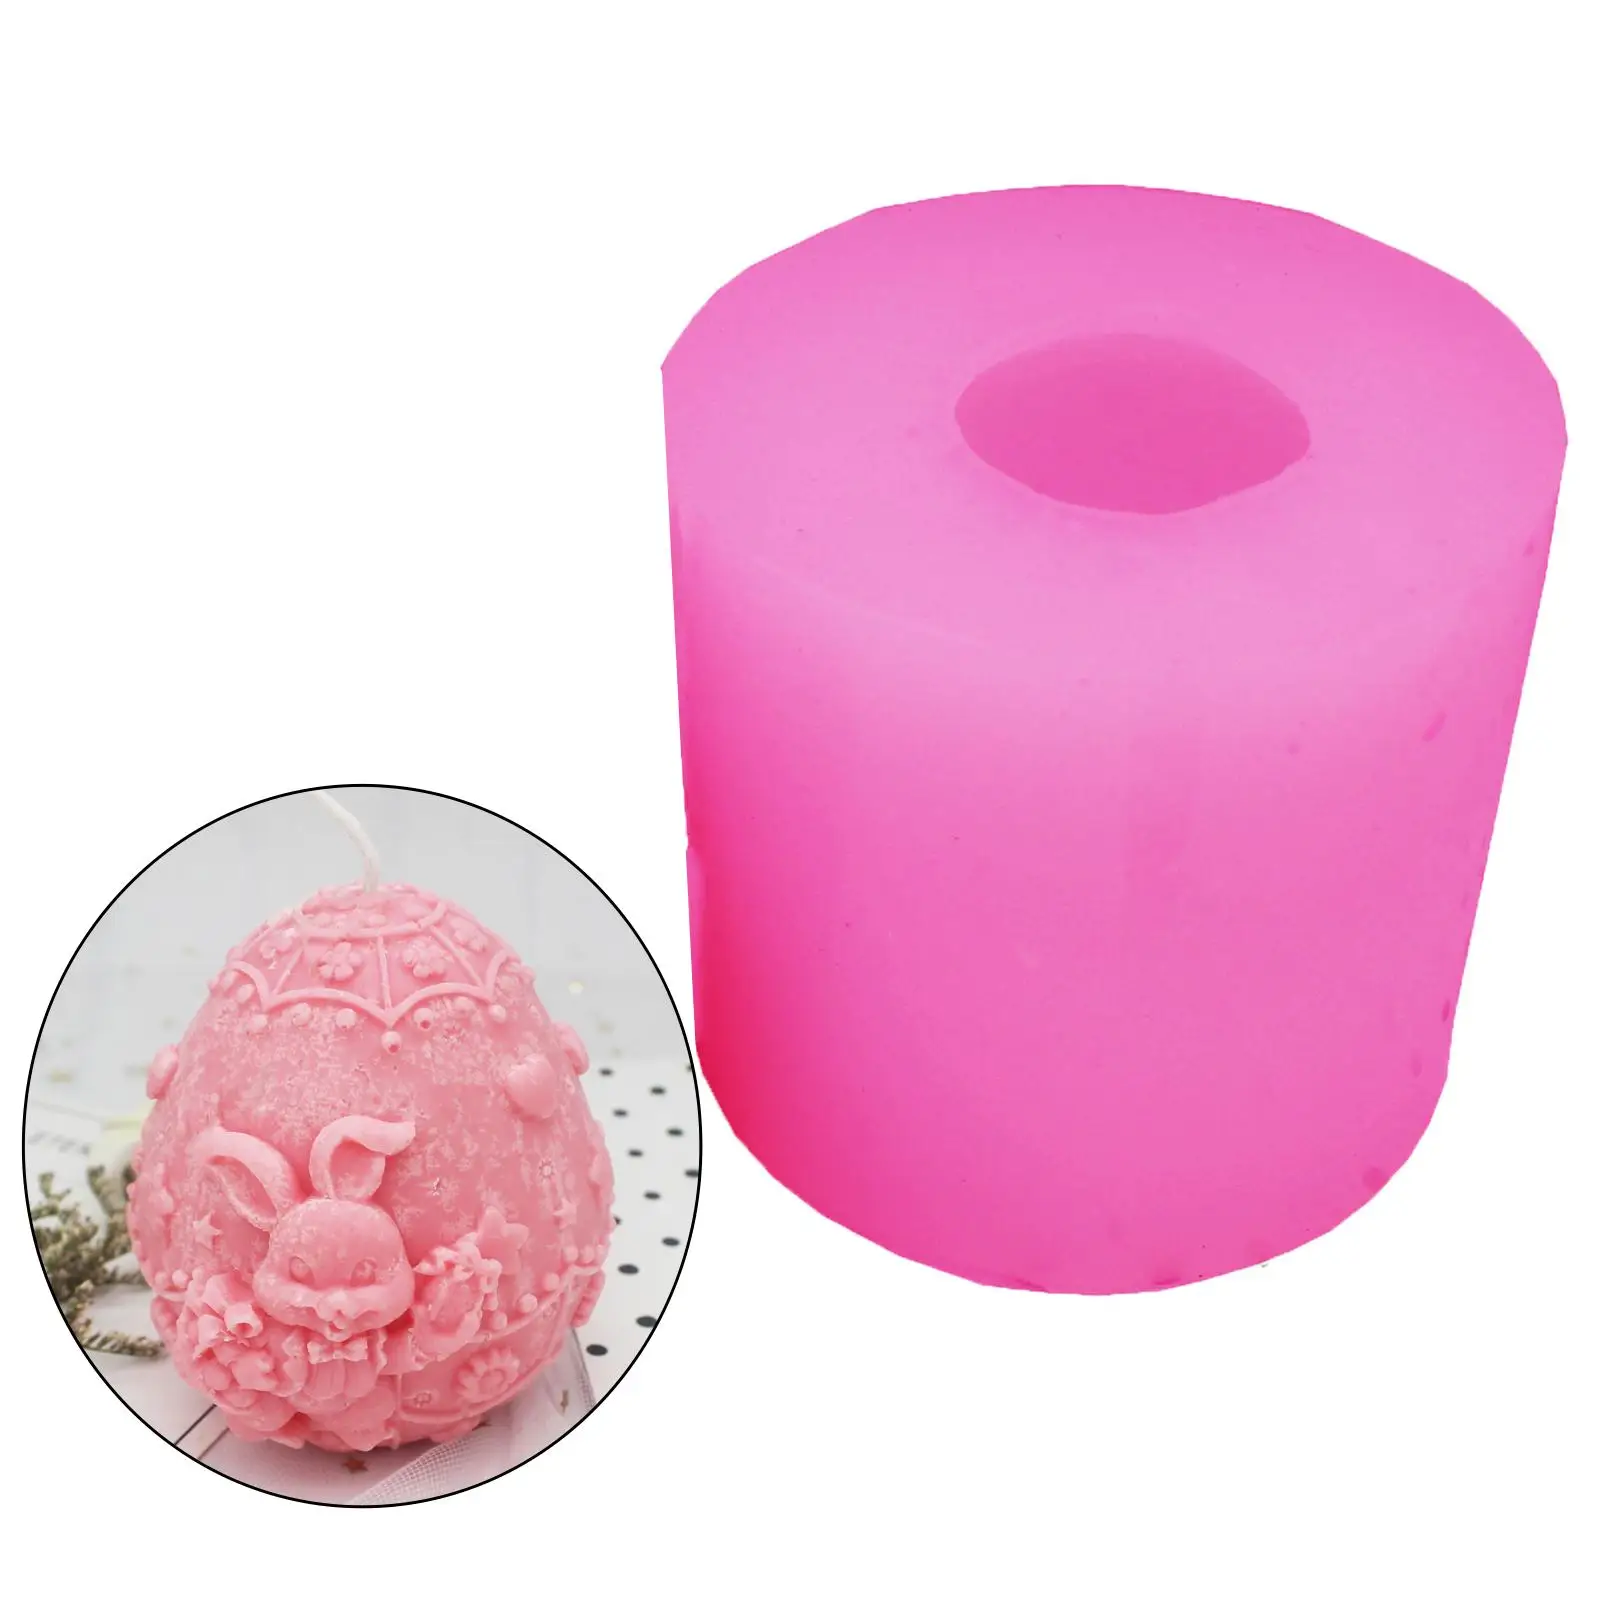 Silicone Candle Mold 3D Easter Egg Mould DIY Clay Resin Candle Making Art